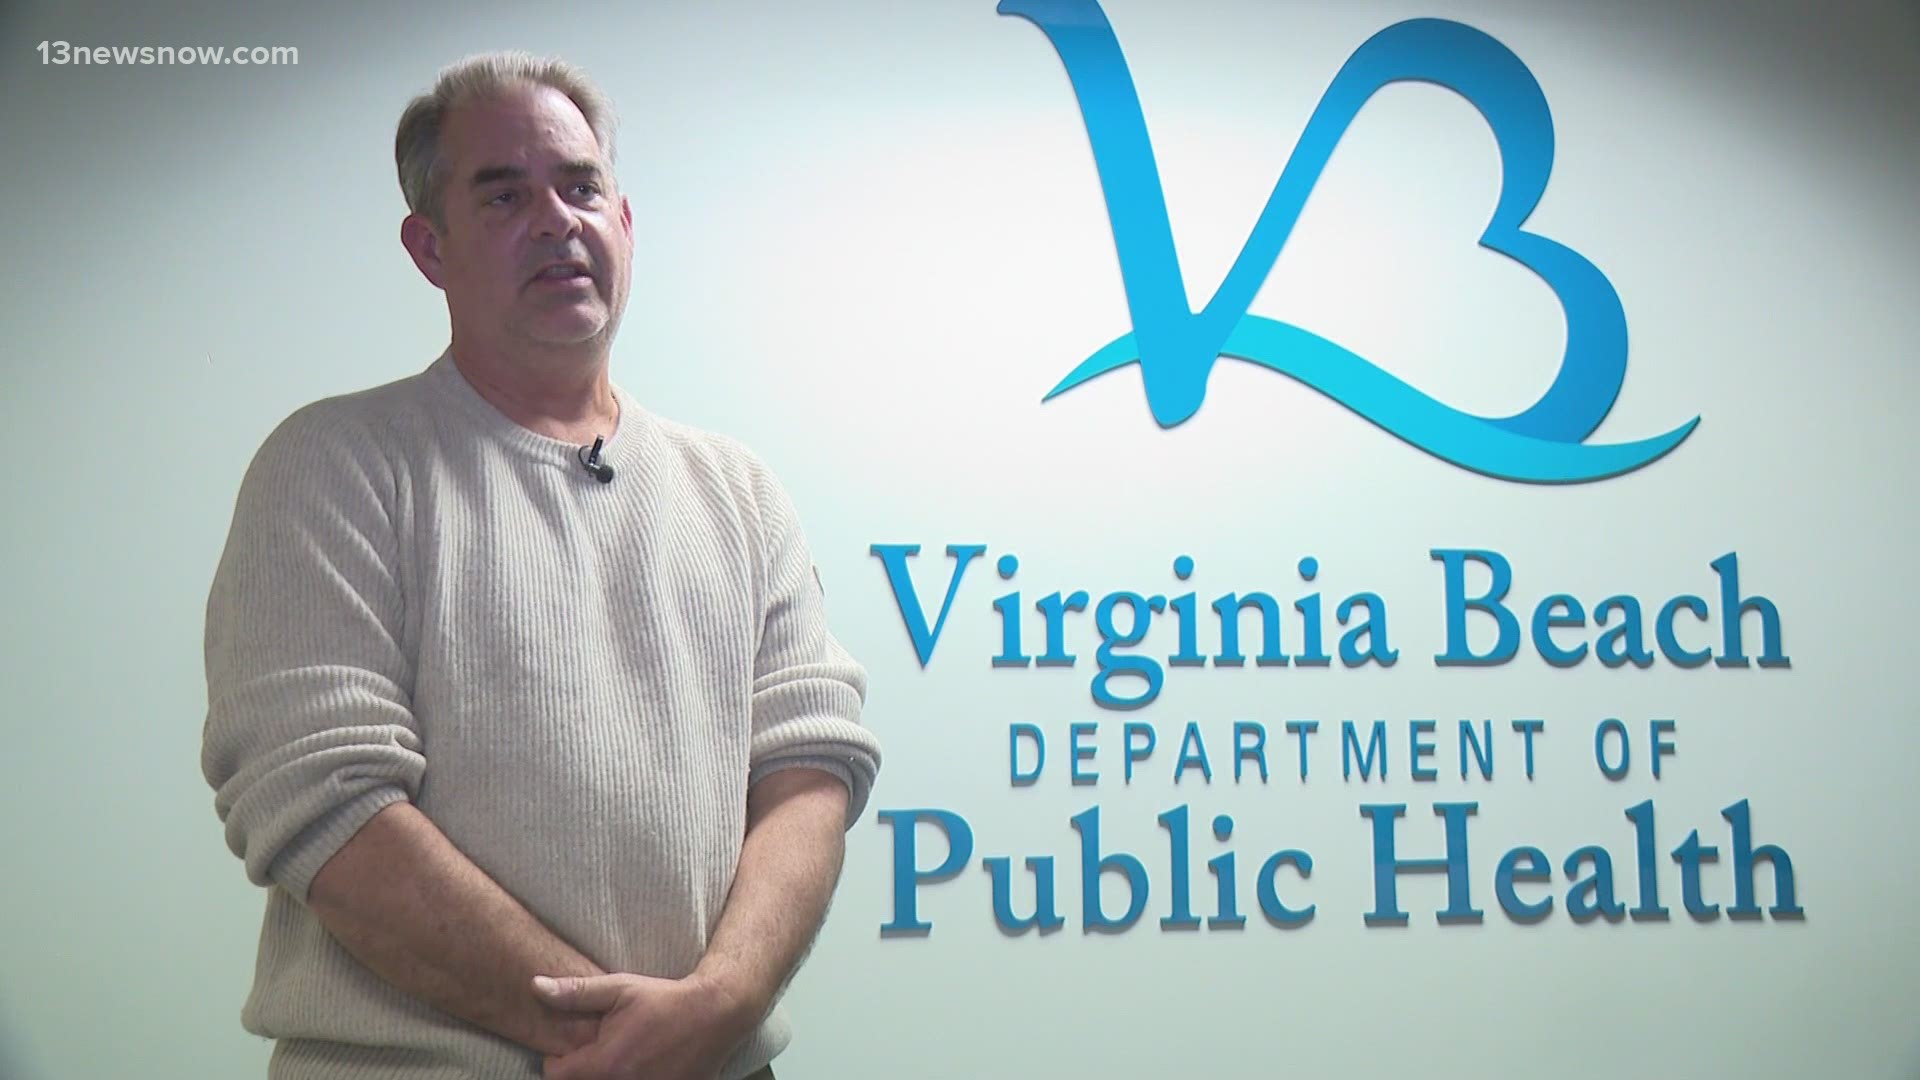 Allison Bazzle has answers to the top 5 questions people have been asking the Virginia Beach Health Department.